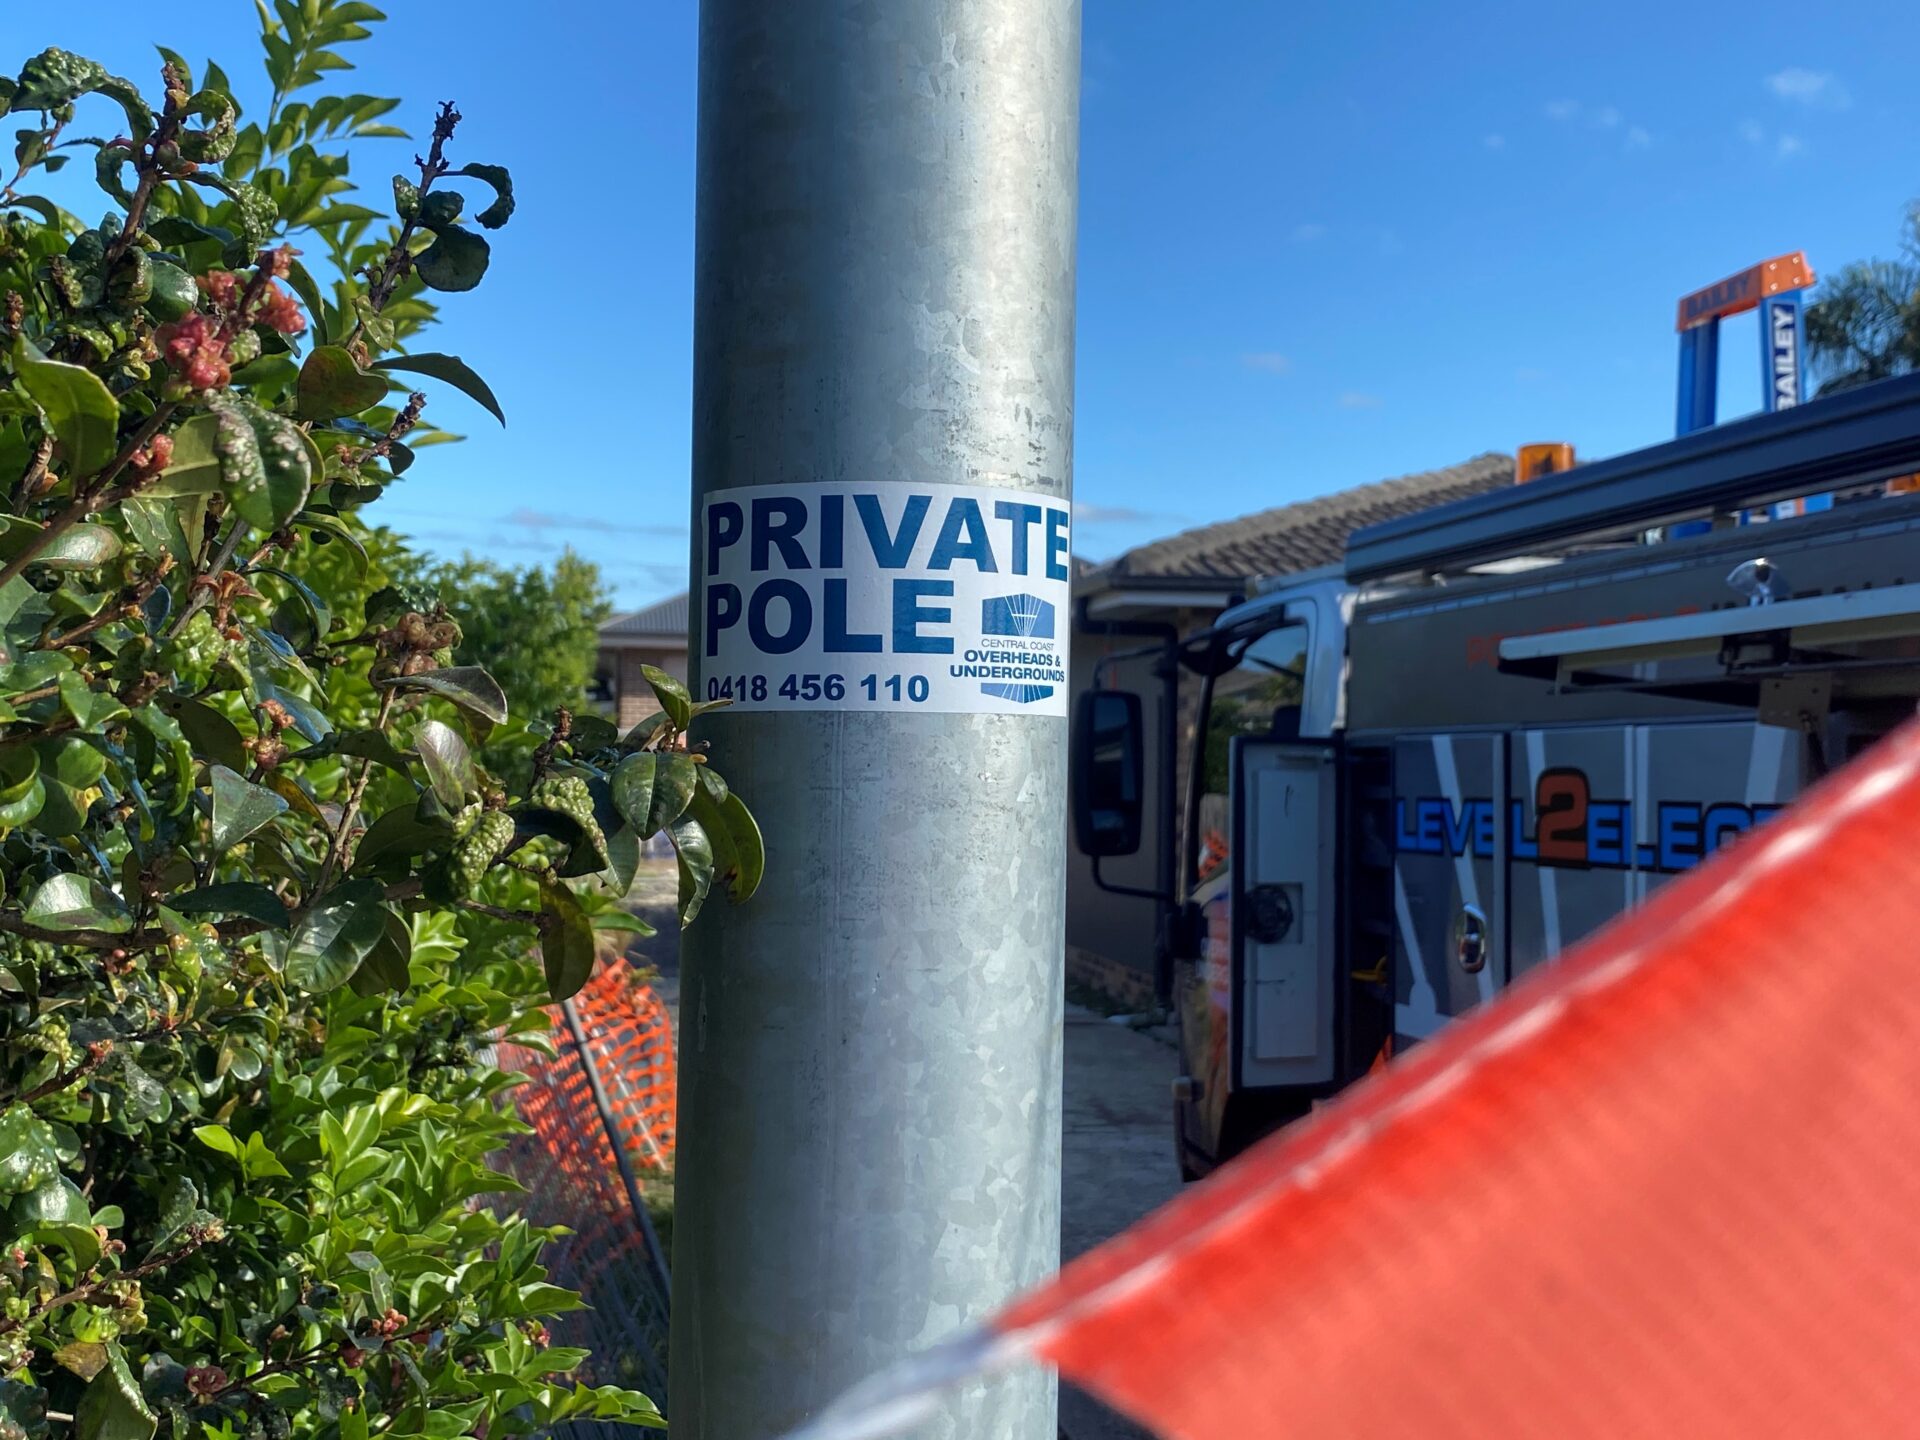 Private power pole - steel